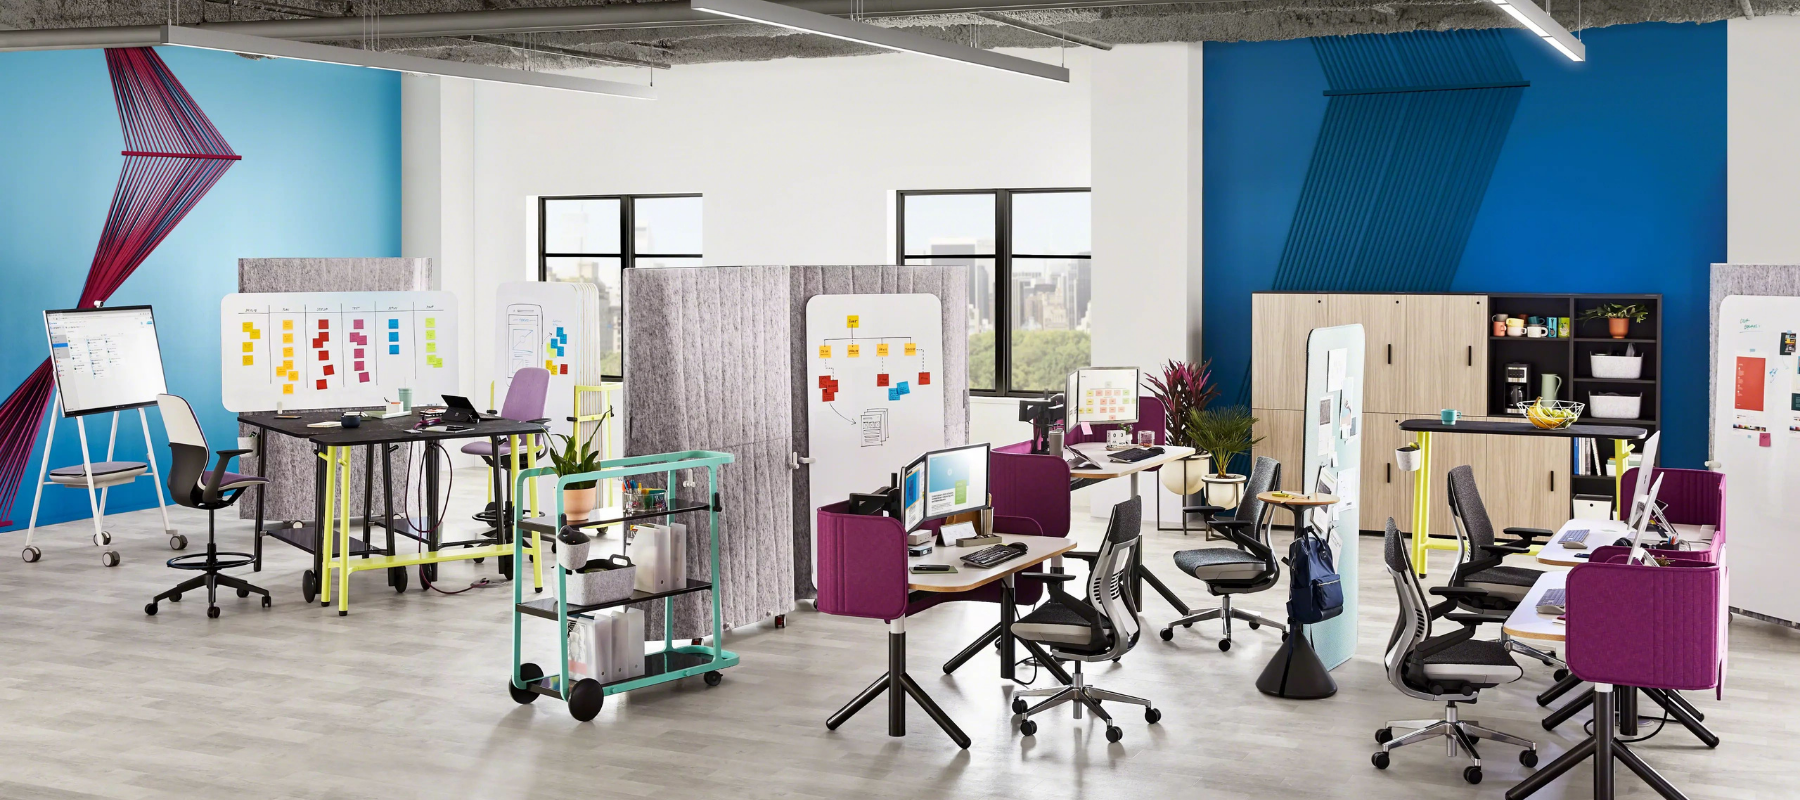 Steelcase Flex Collection featuring mobile furniture for individuals and teams